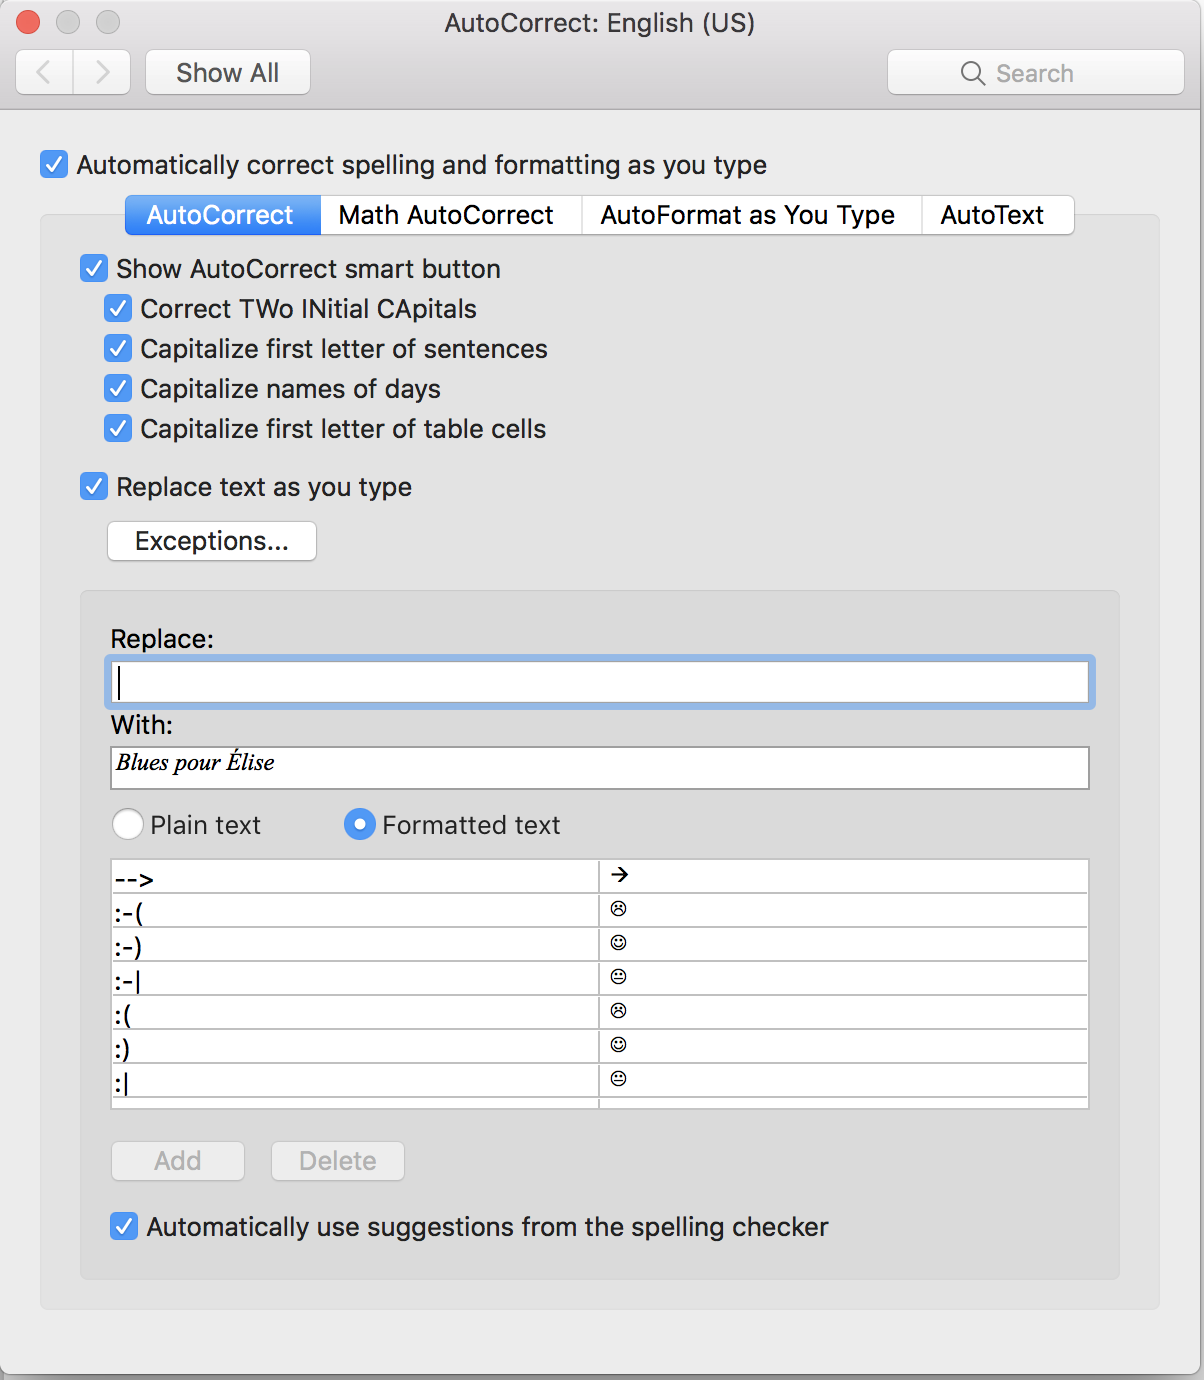 AutoCorrect Screen in Word Tech Tools for Long Academic Writing Projects